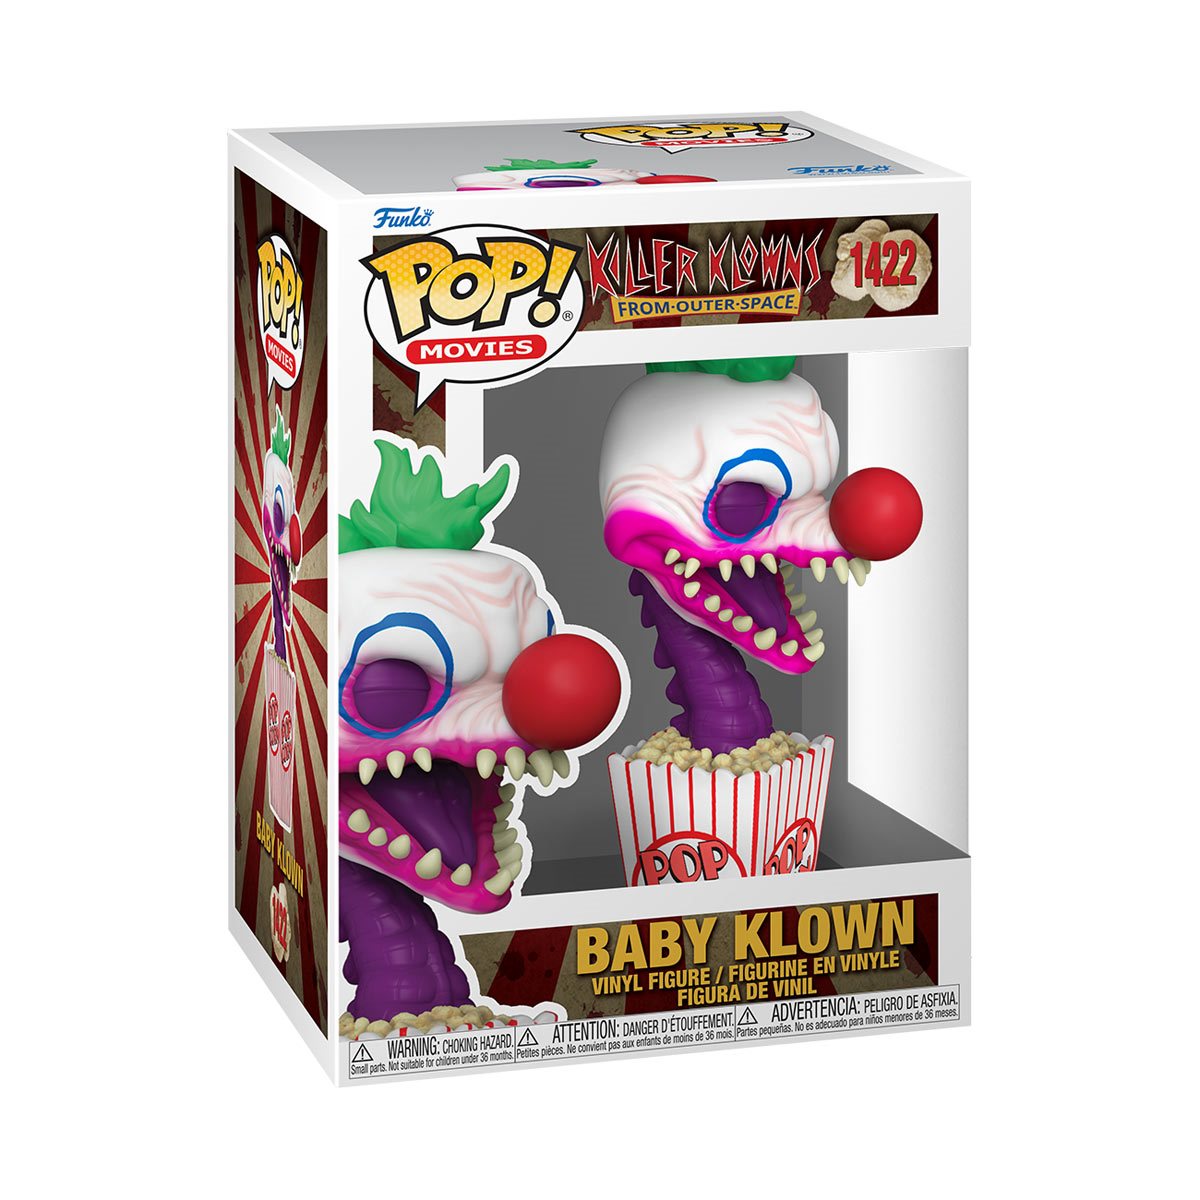 Funko Pop! Killer Klowns from Outer Space - Baby Klown